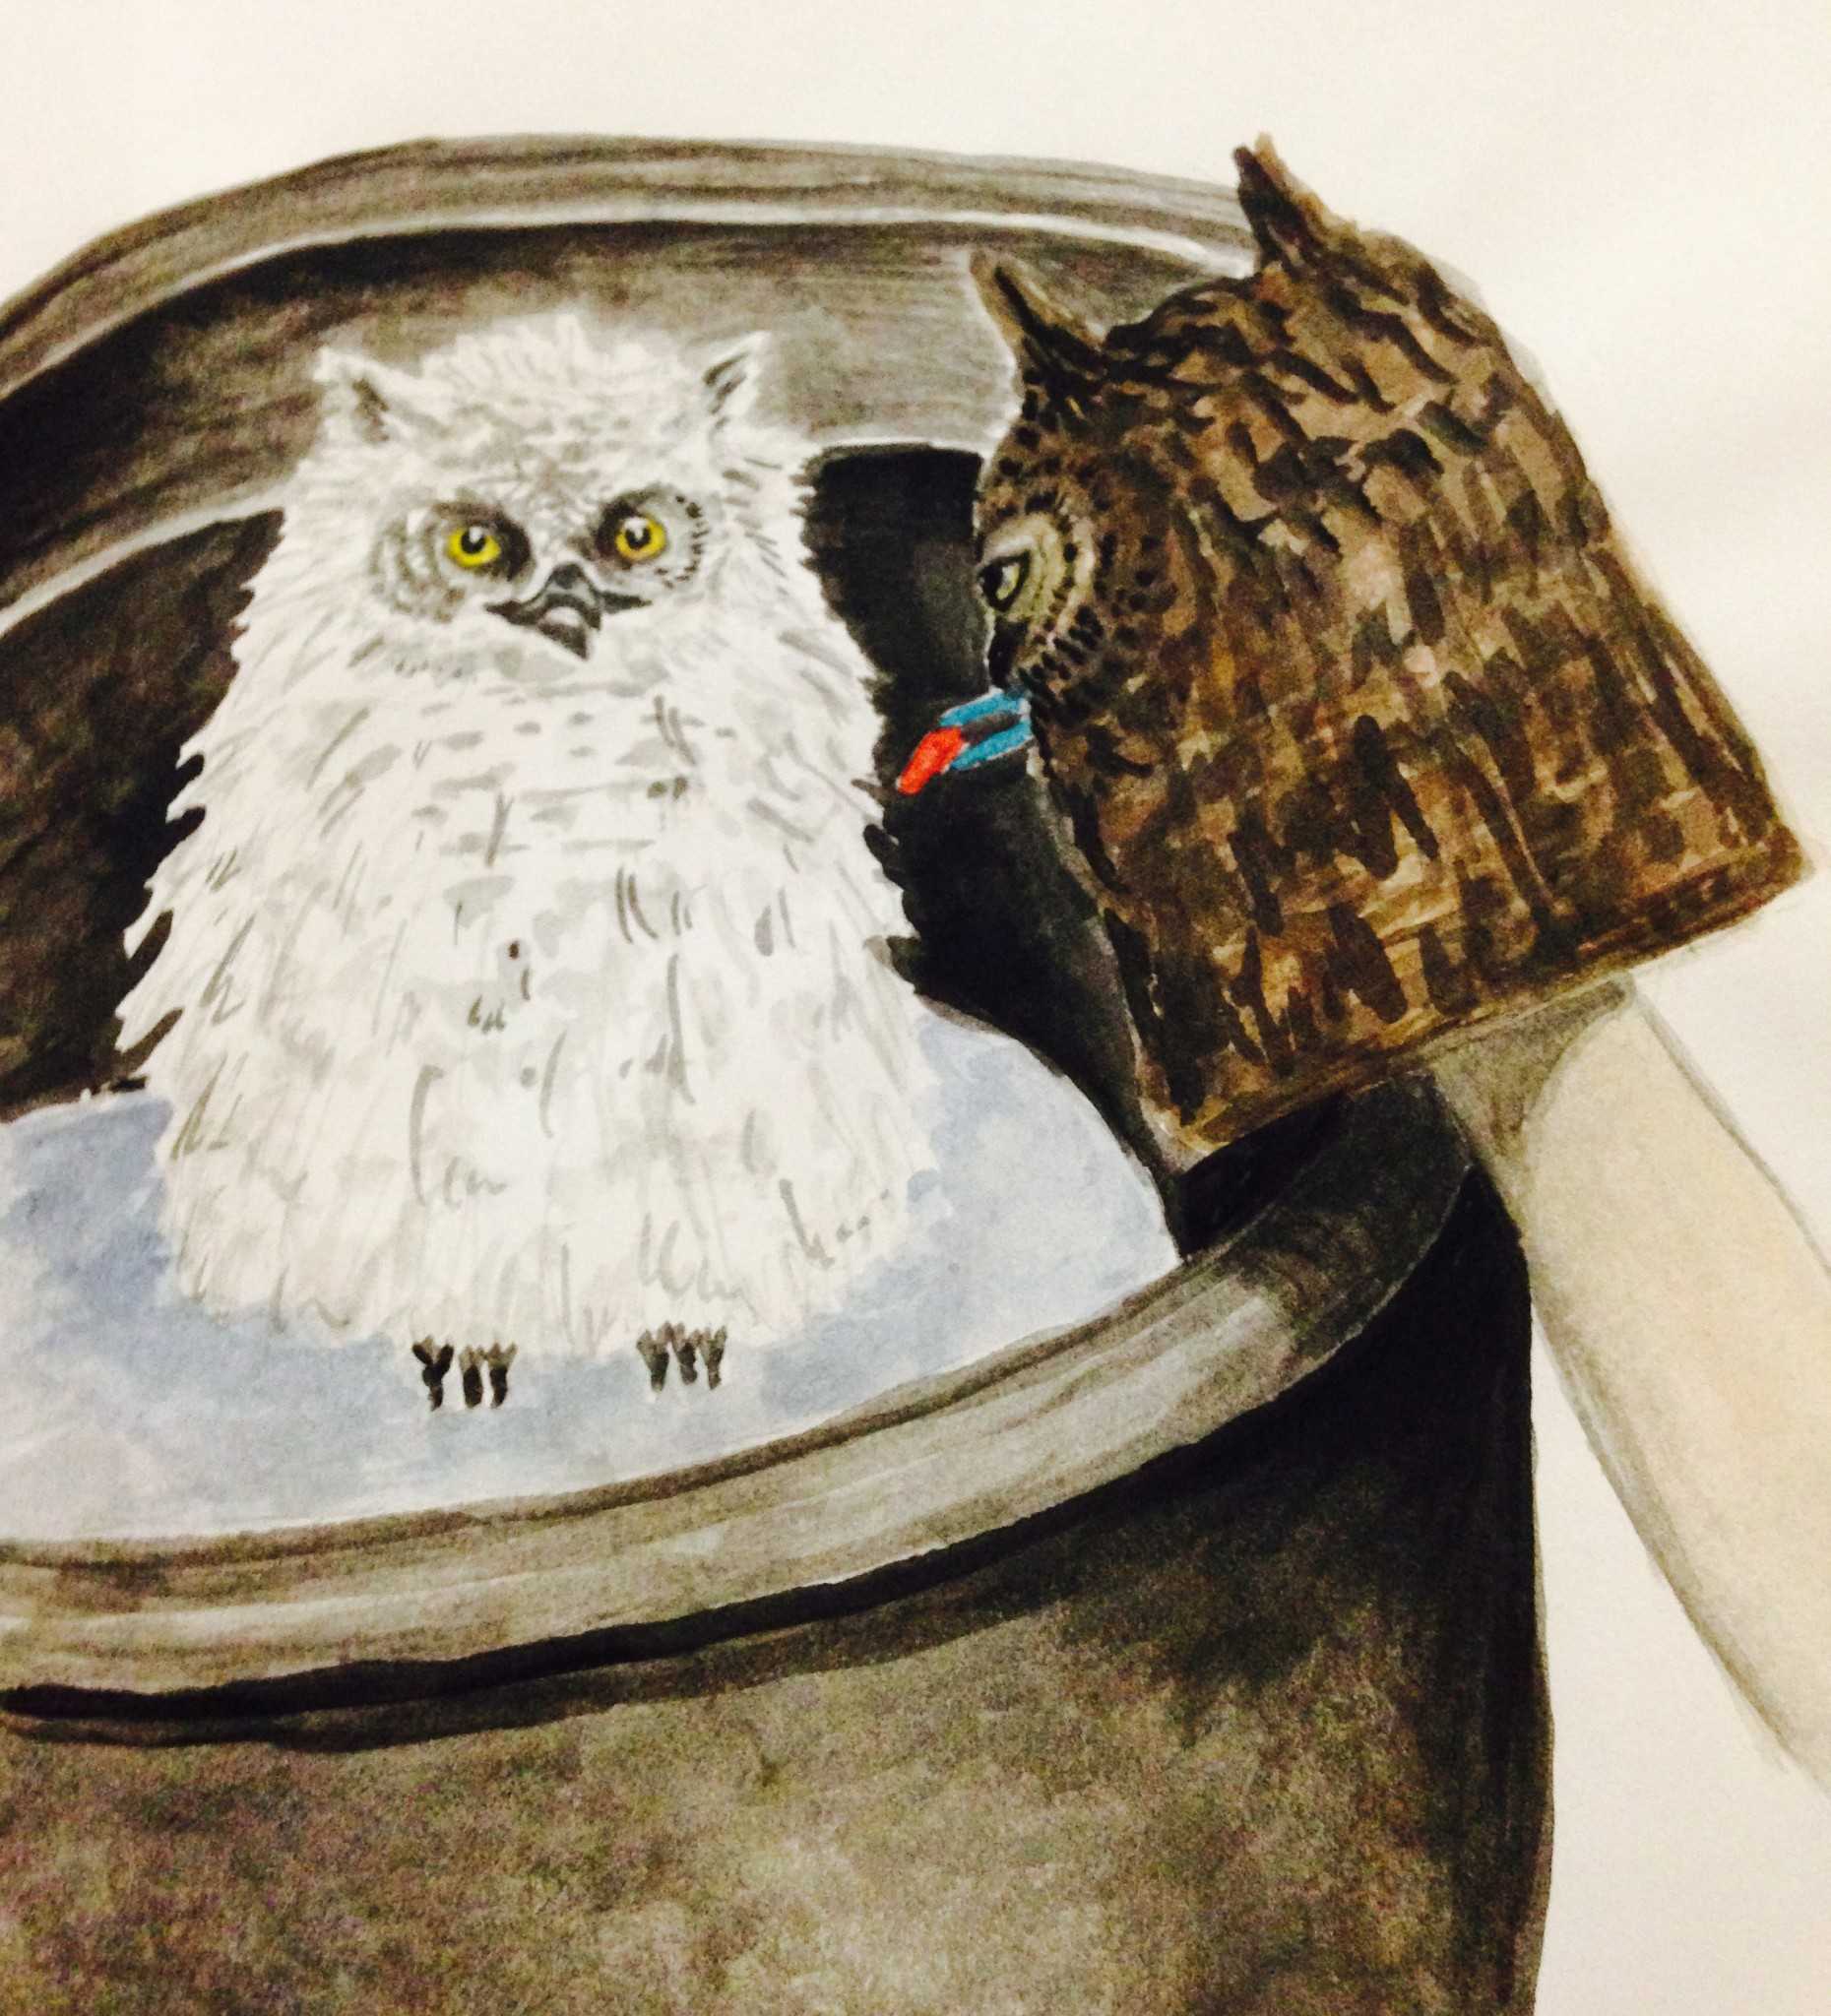 Watercolor sketch feeding a Great Horned Owlet with a puppet by Victoria Dixie Crowe. (2002)